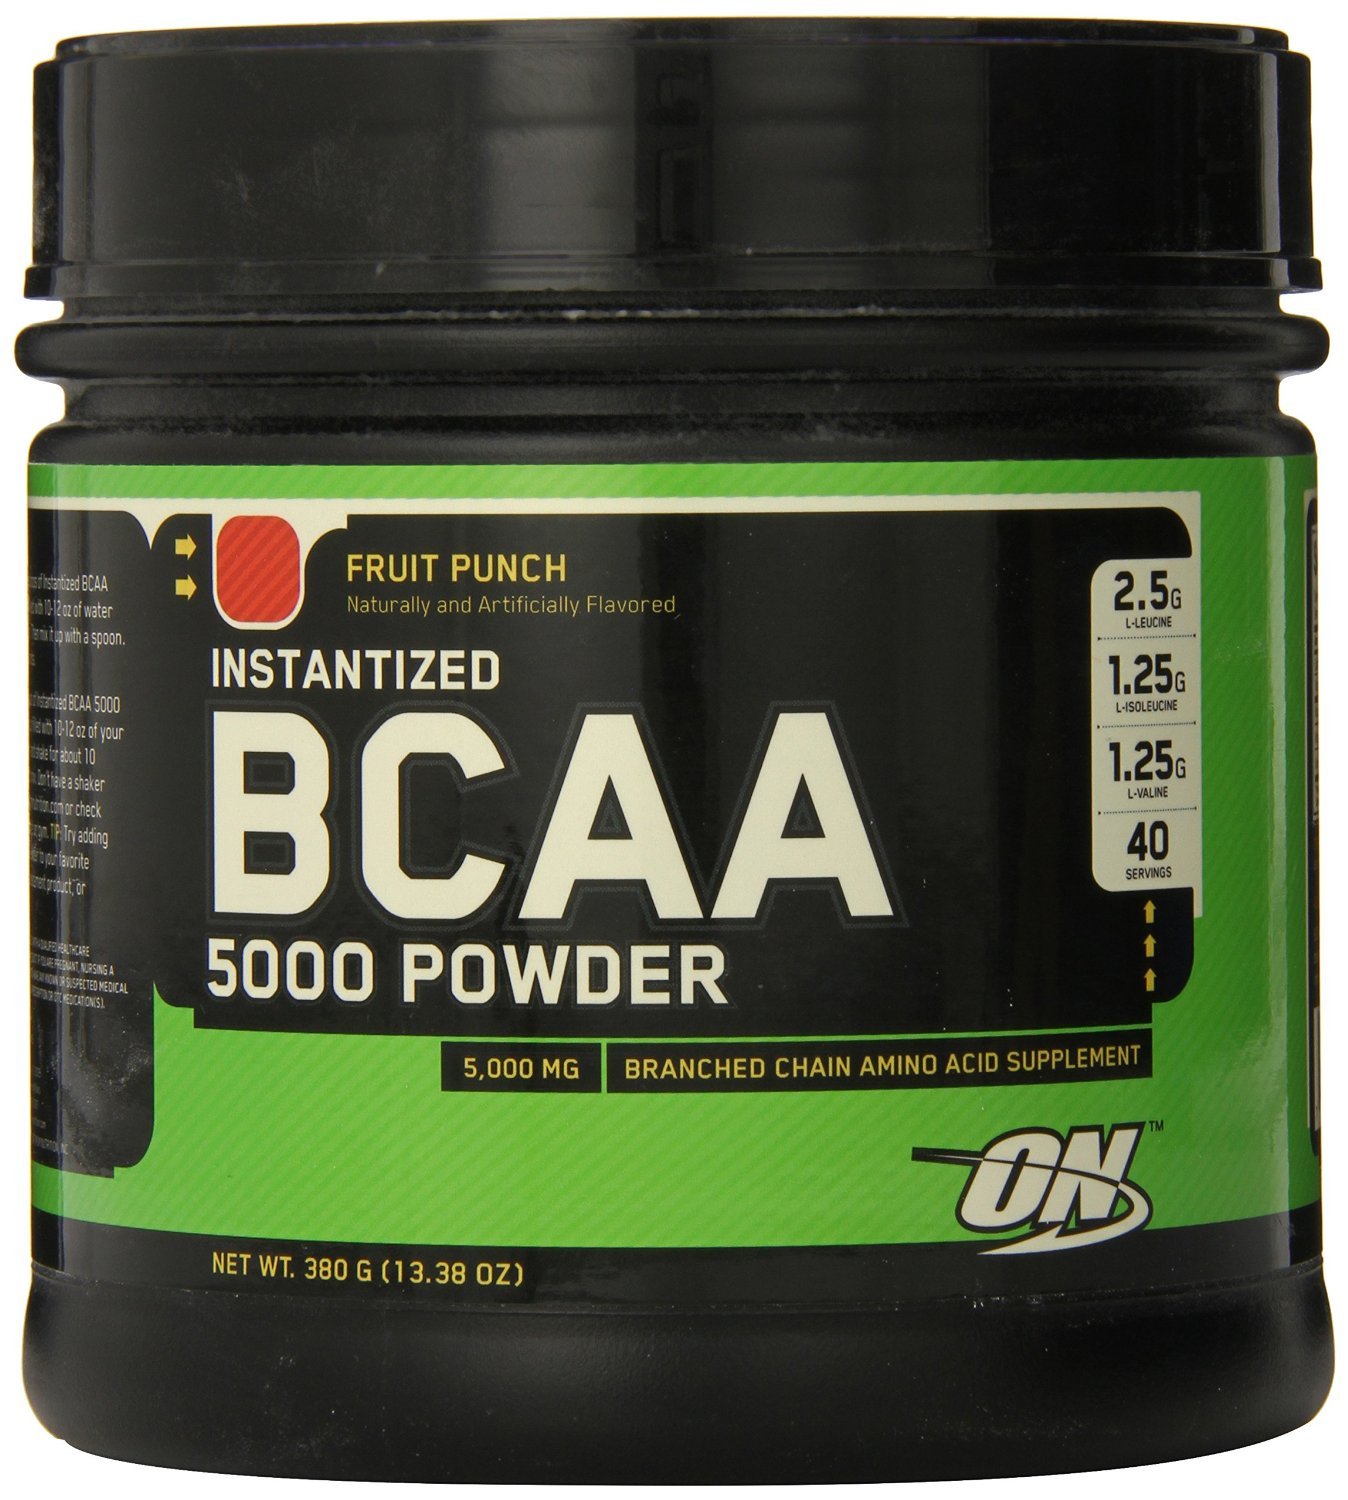 Instantized BCAA Porder 5000, 380 g, Optimum Nutrition. BCAA. Weight Loss recovery Anti-catabolic properties Lean muscle mass 